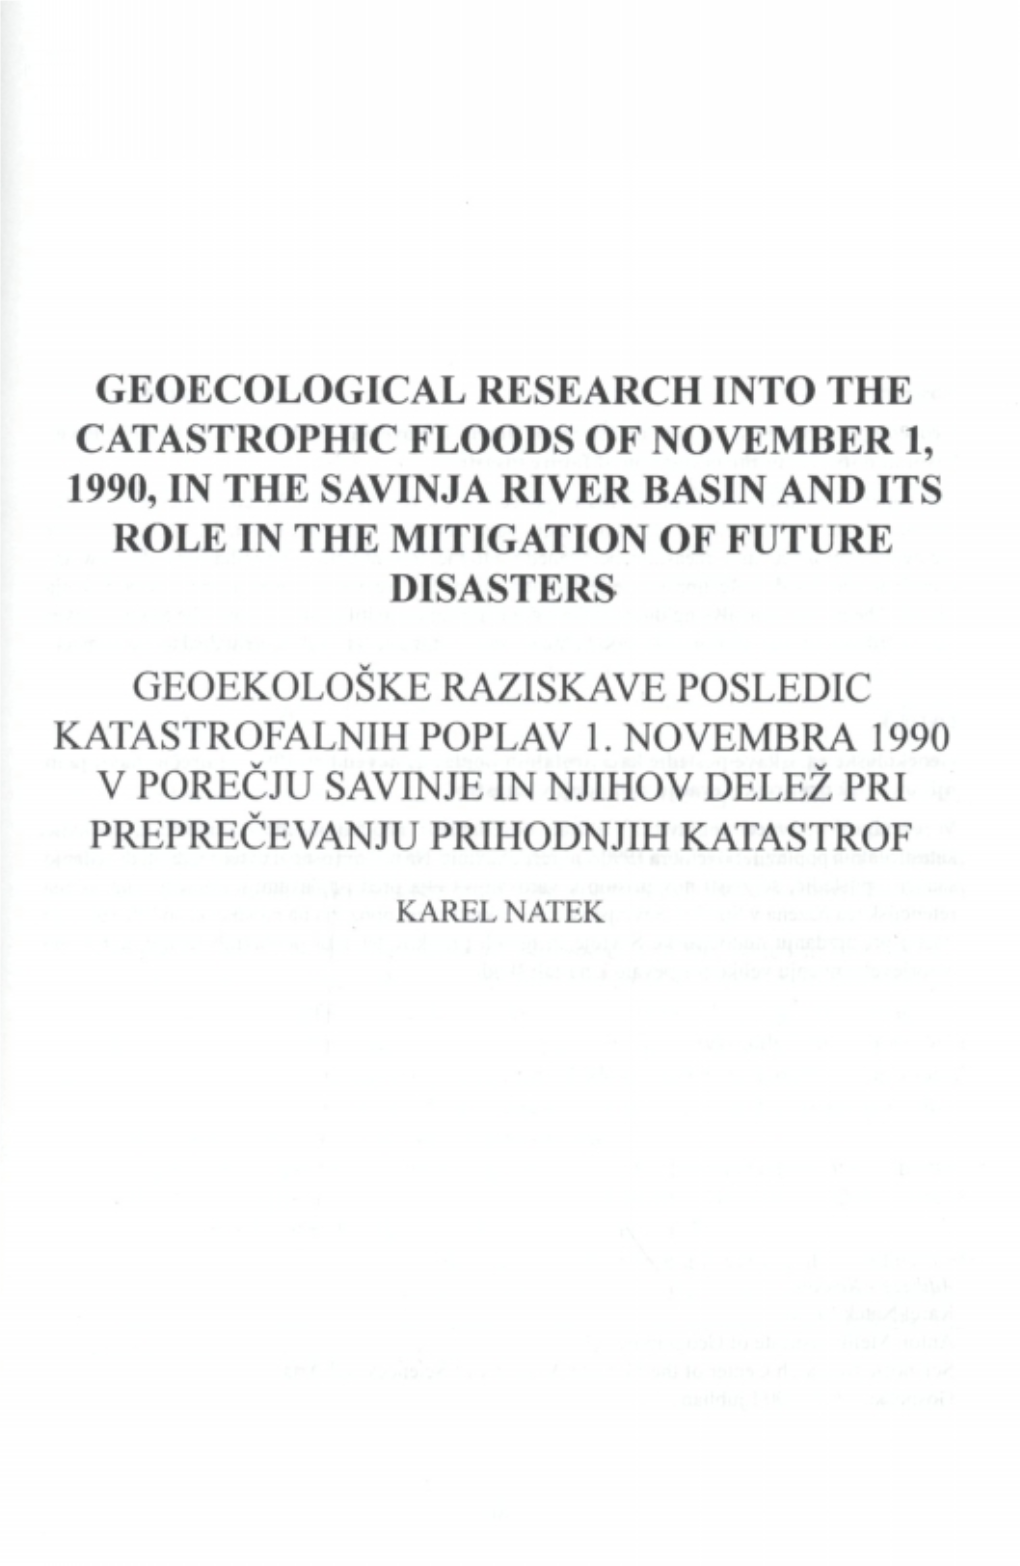 Geoecological Research Into the Catastrophic Floods of November 1, 1990, in the Savinja River Basin and Its Role in the Mitigation of Future Disasters